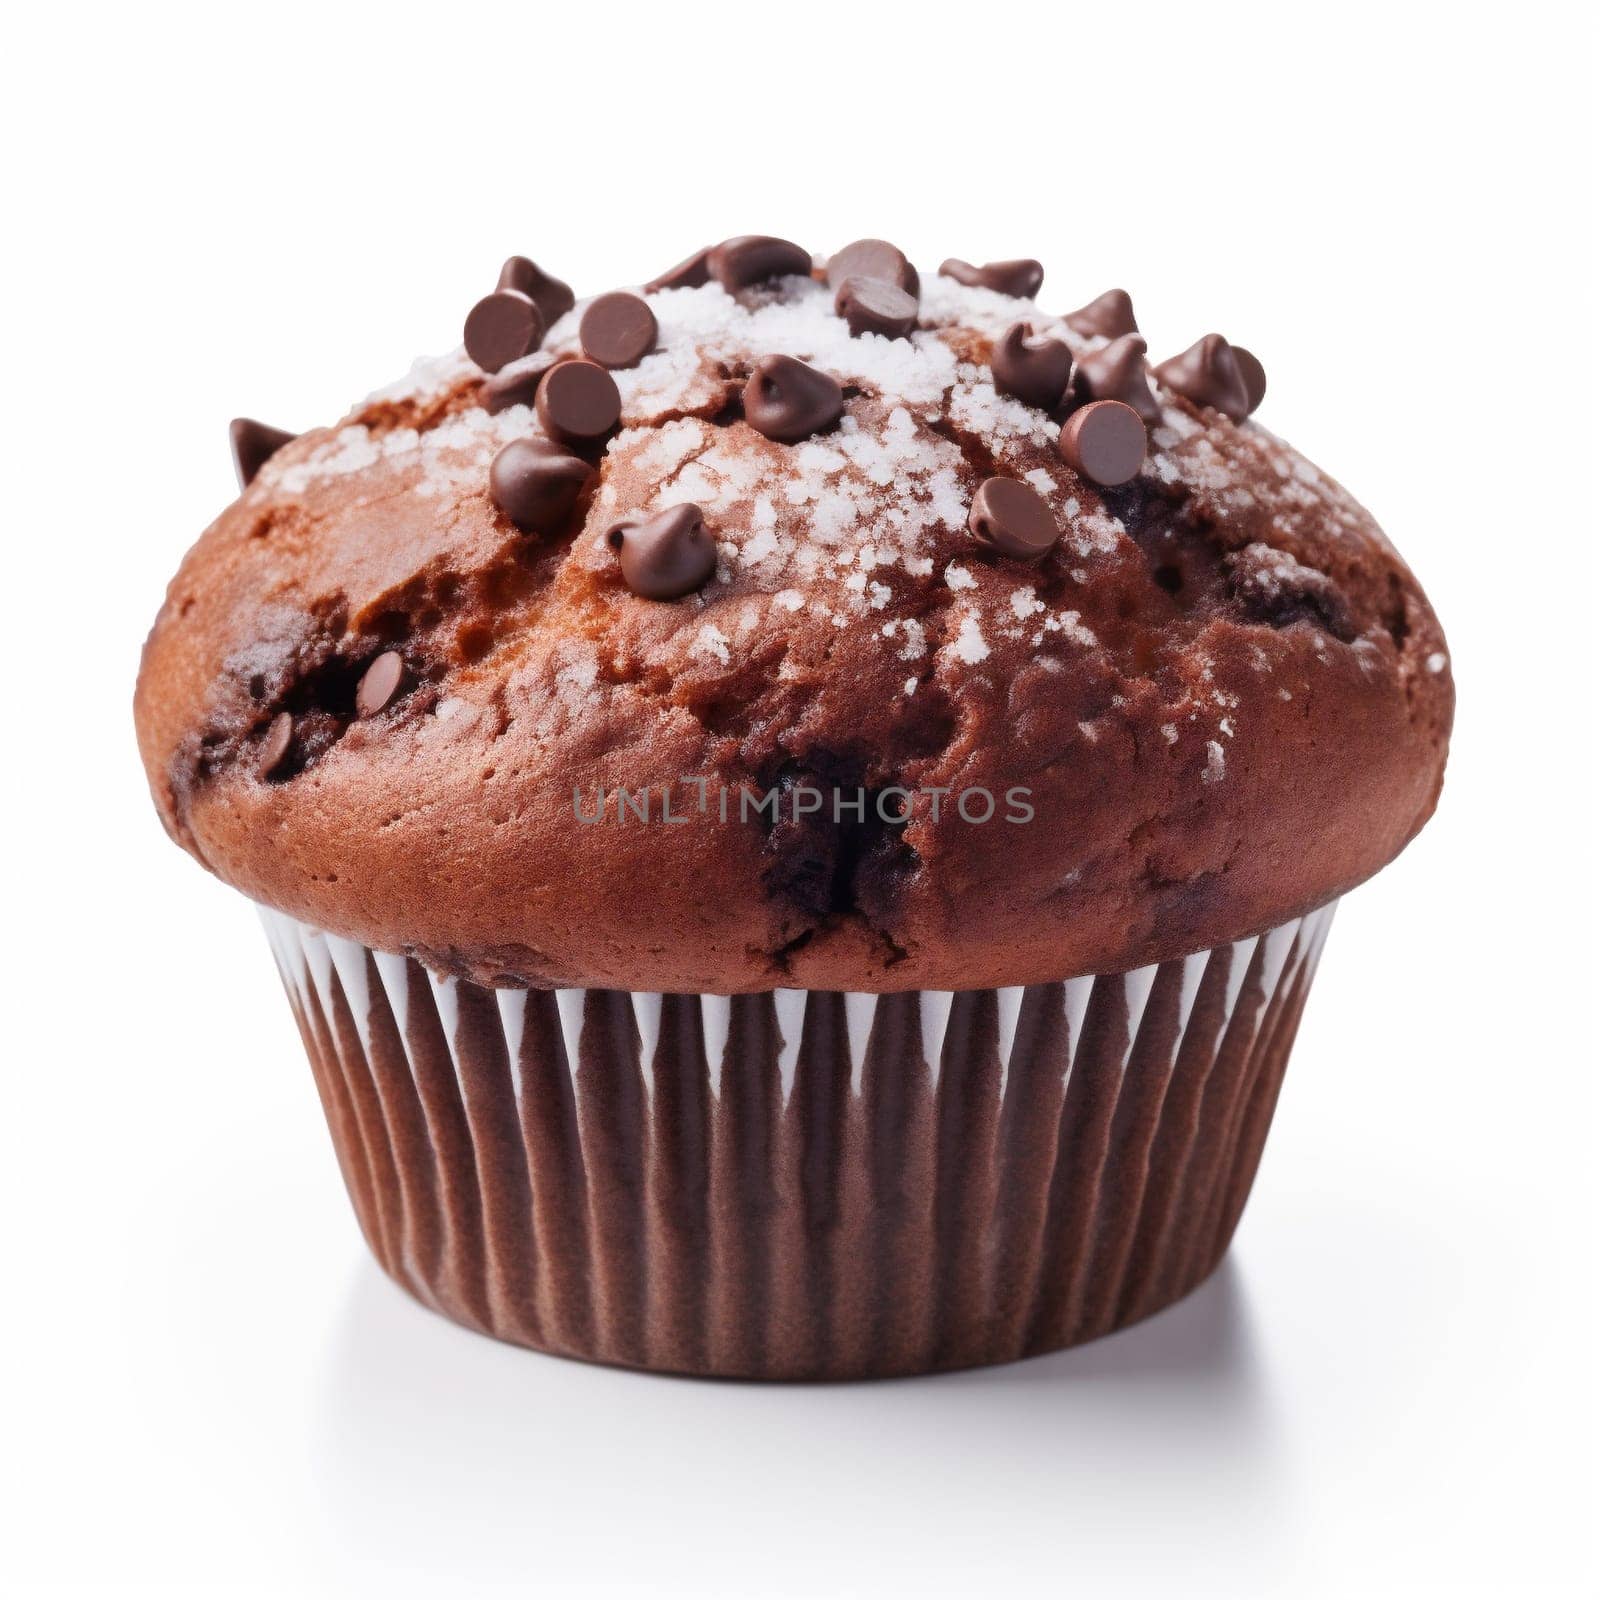 Fresh Baked Single Chocolate Muffin Isolated on White Background. Chocolate Muffin with Chocolate Chip in a Paper Muffin Cup.